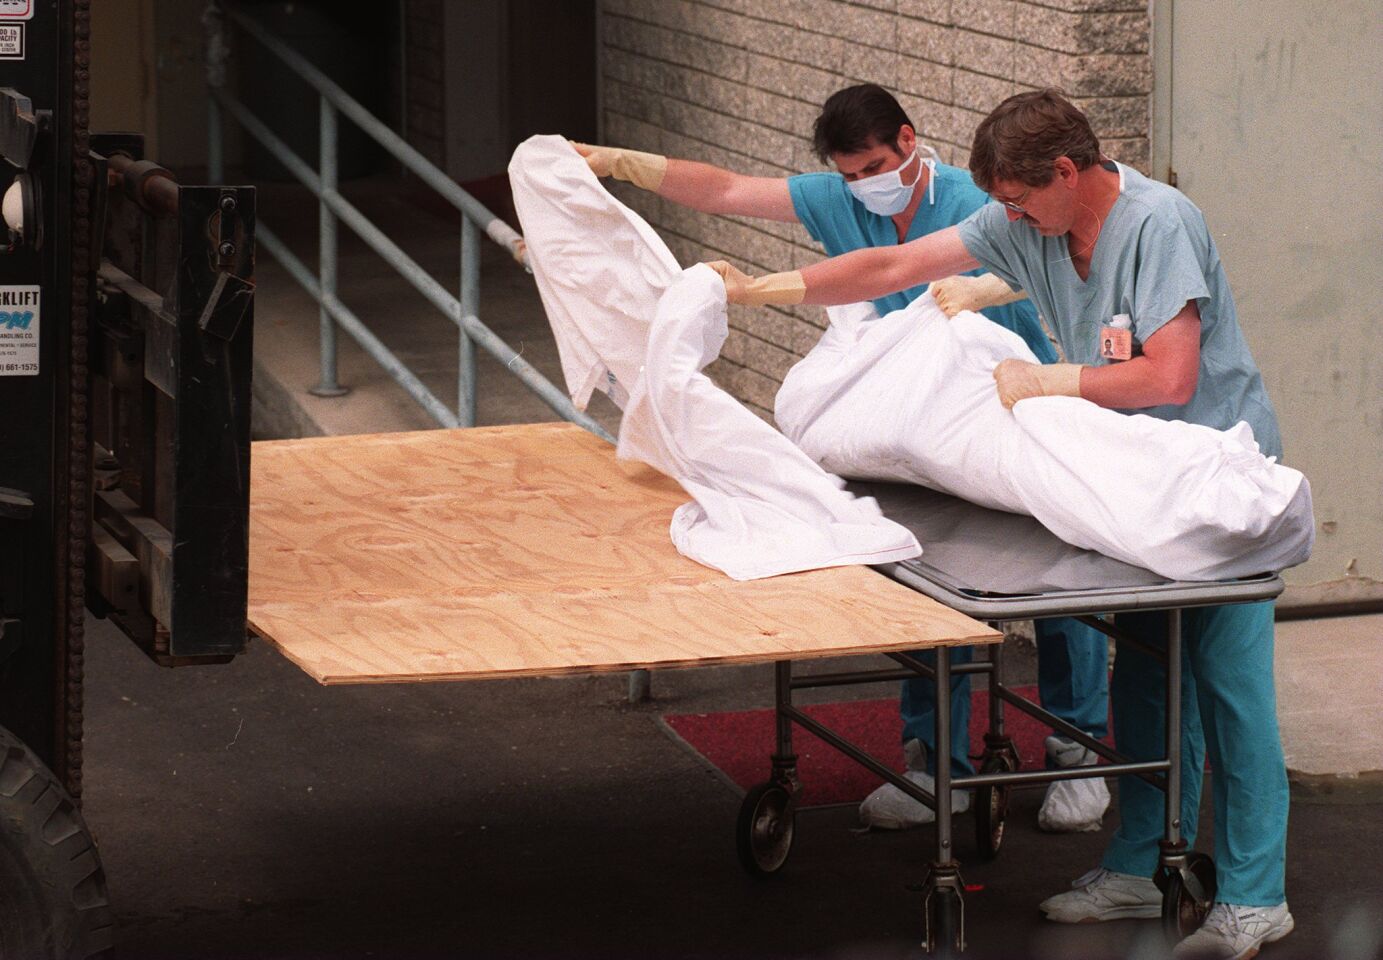 Medical examiner's employees prepare to wheel inside the agency's Kearny Mesa office a body removed the Rancho Santa Fe masnion where the Heaven's Gate mass suicide was discovered on March 26, 1997.